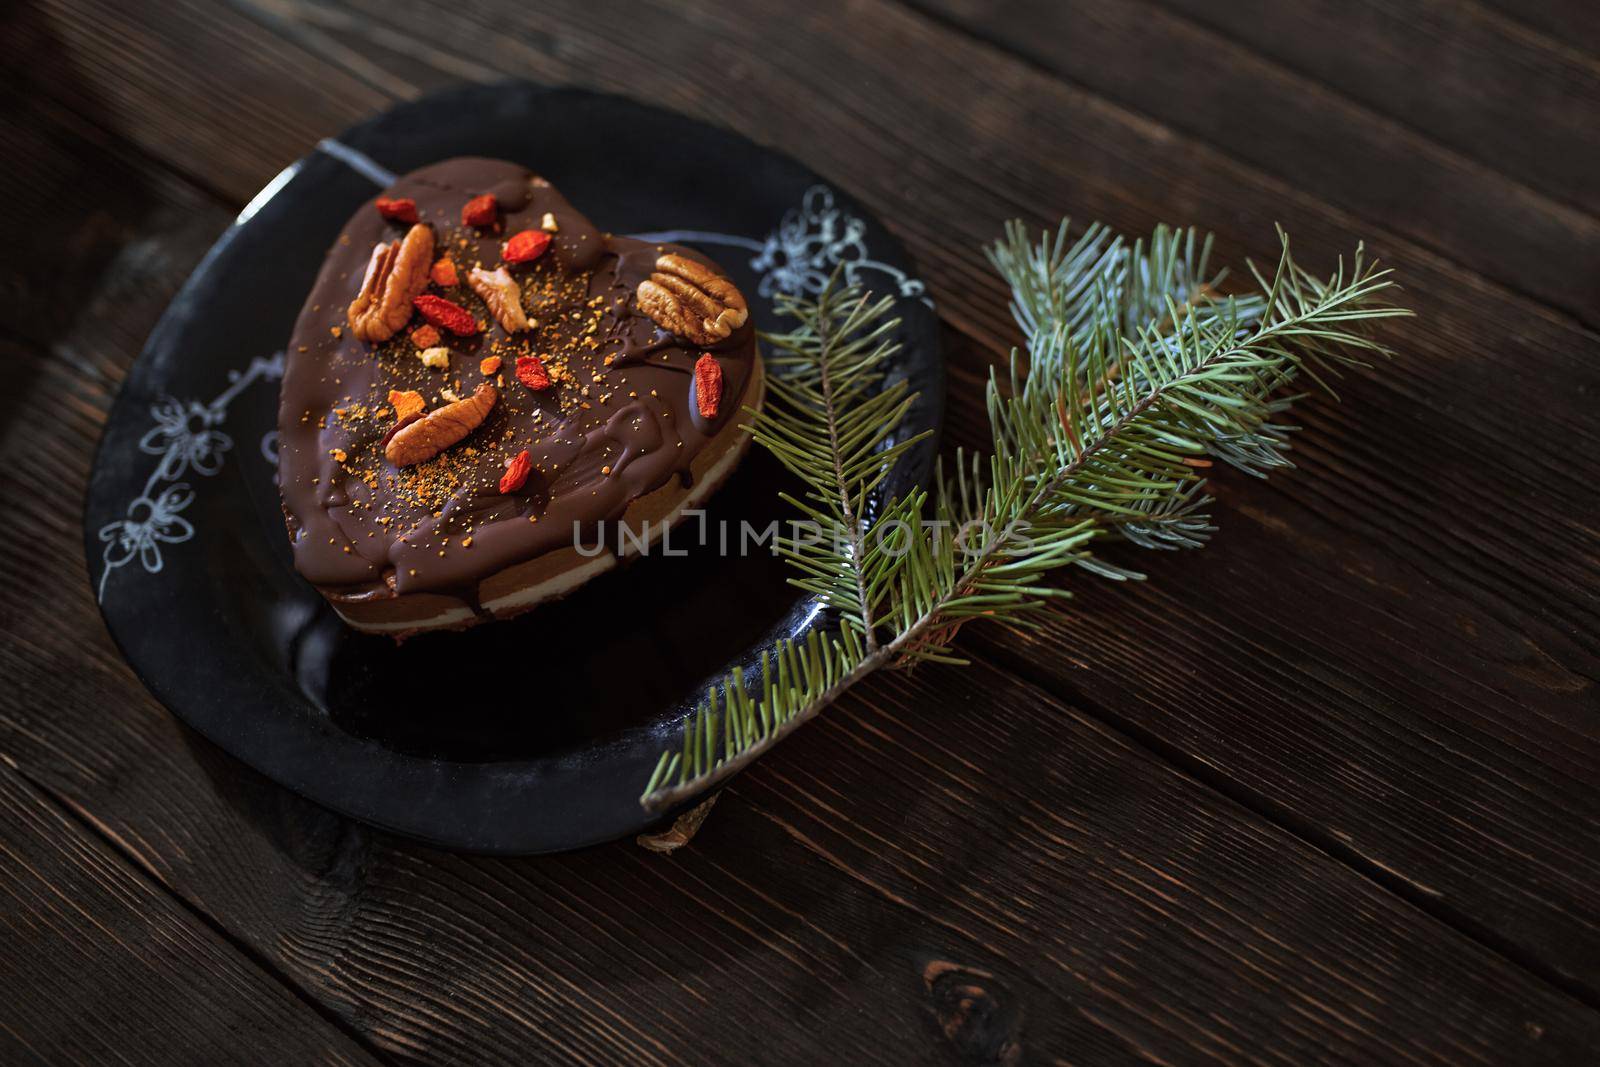 Gluten and dairy free chocolate cake with Christmas tree twig on a wooden table by Novic